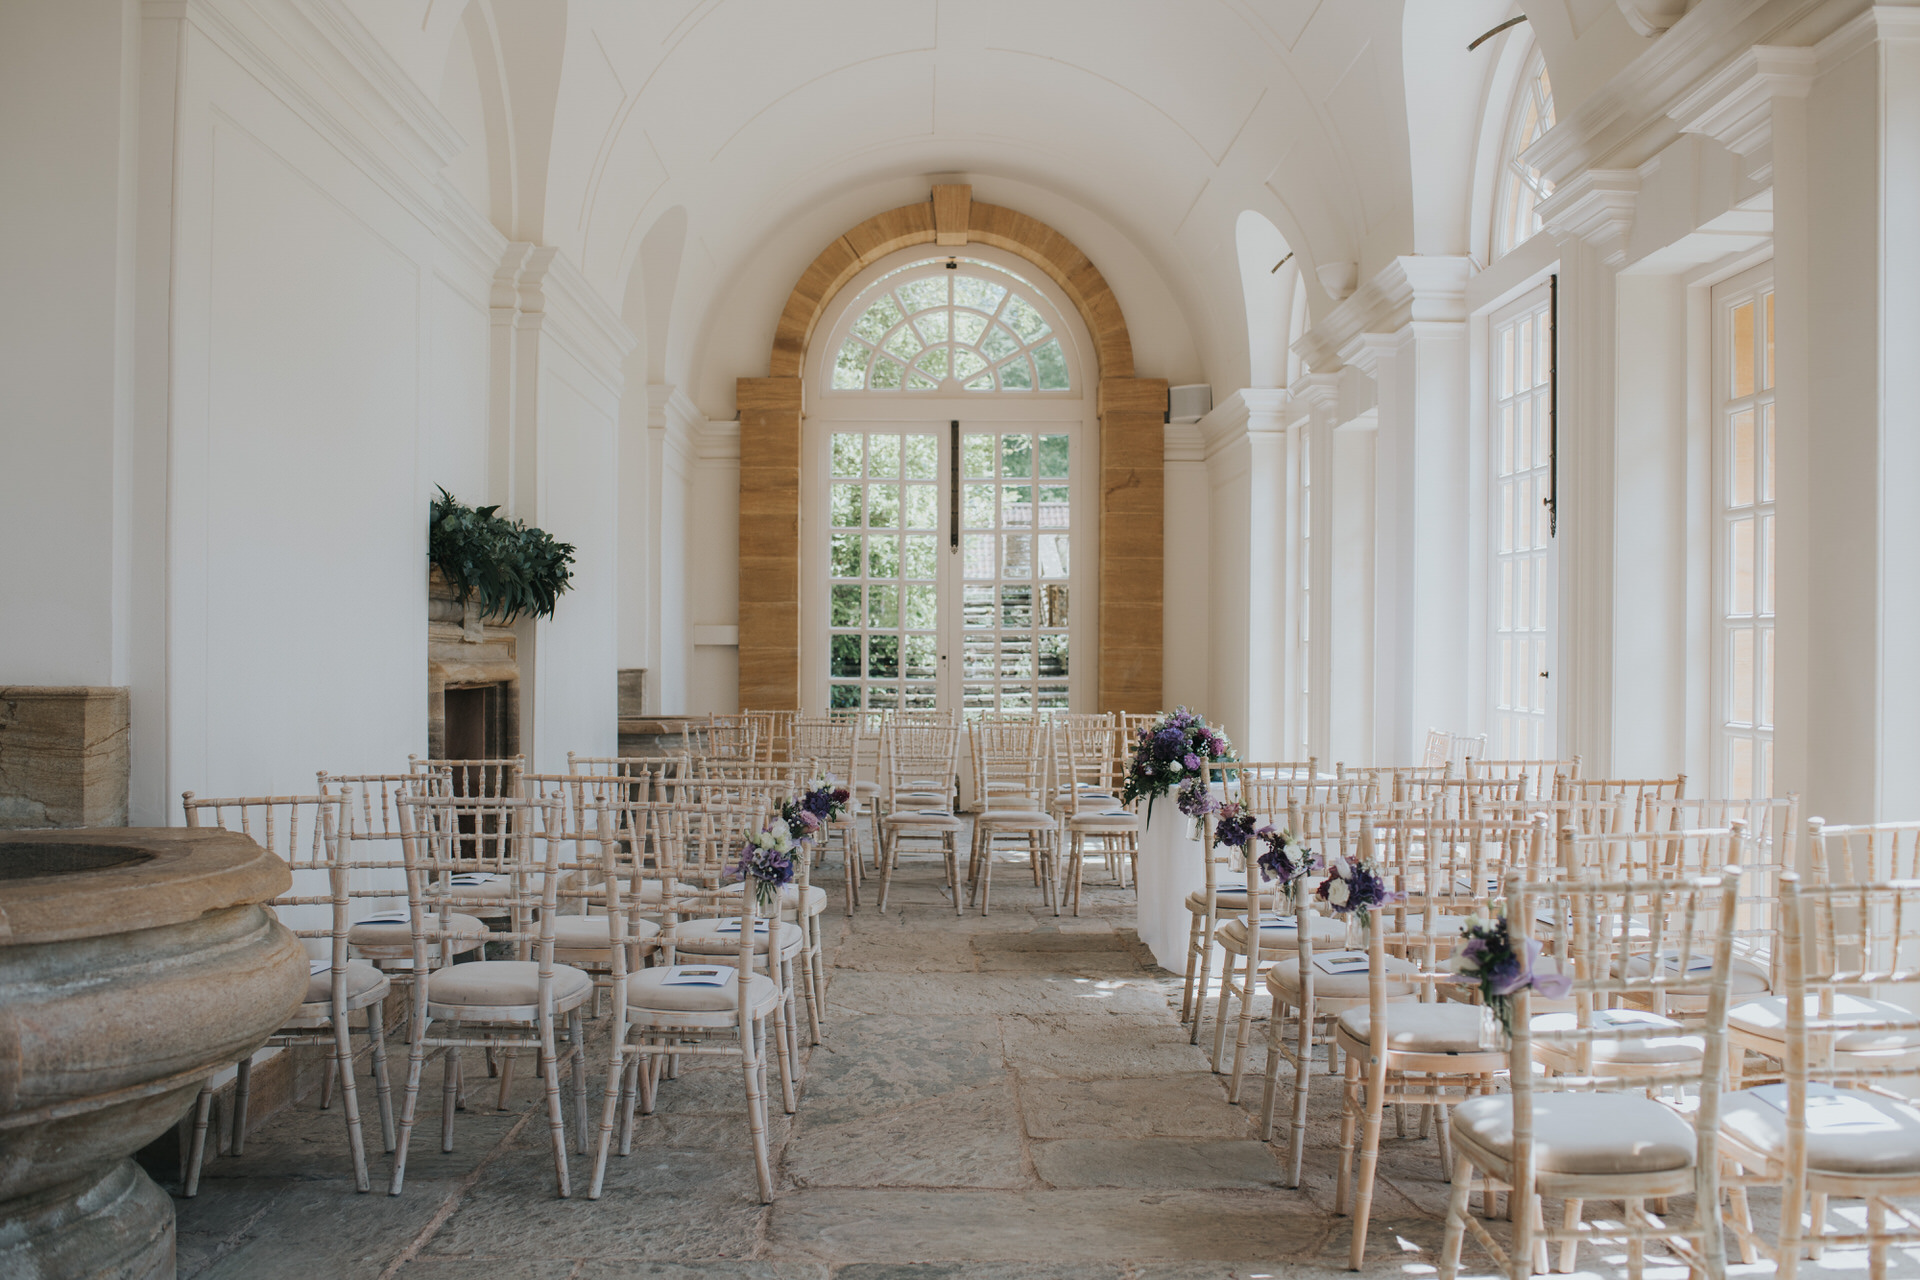 The orangery at hestercombe gardens ready for a wedding ceremony